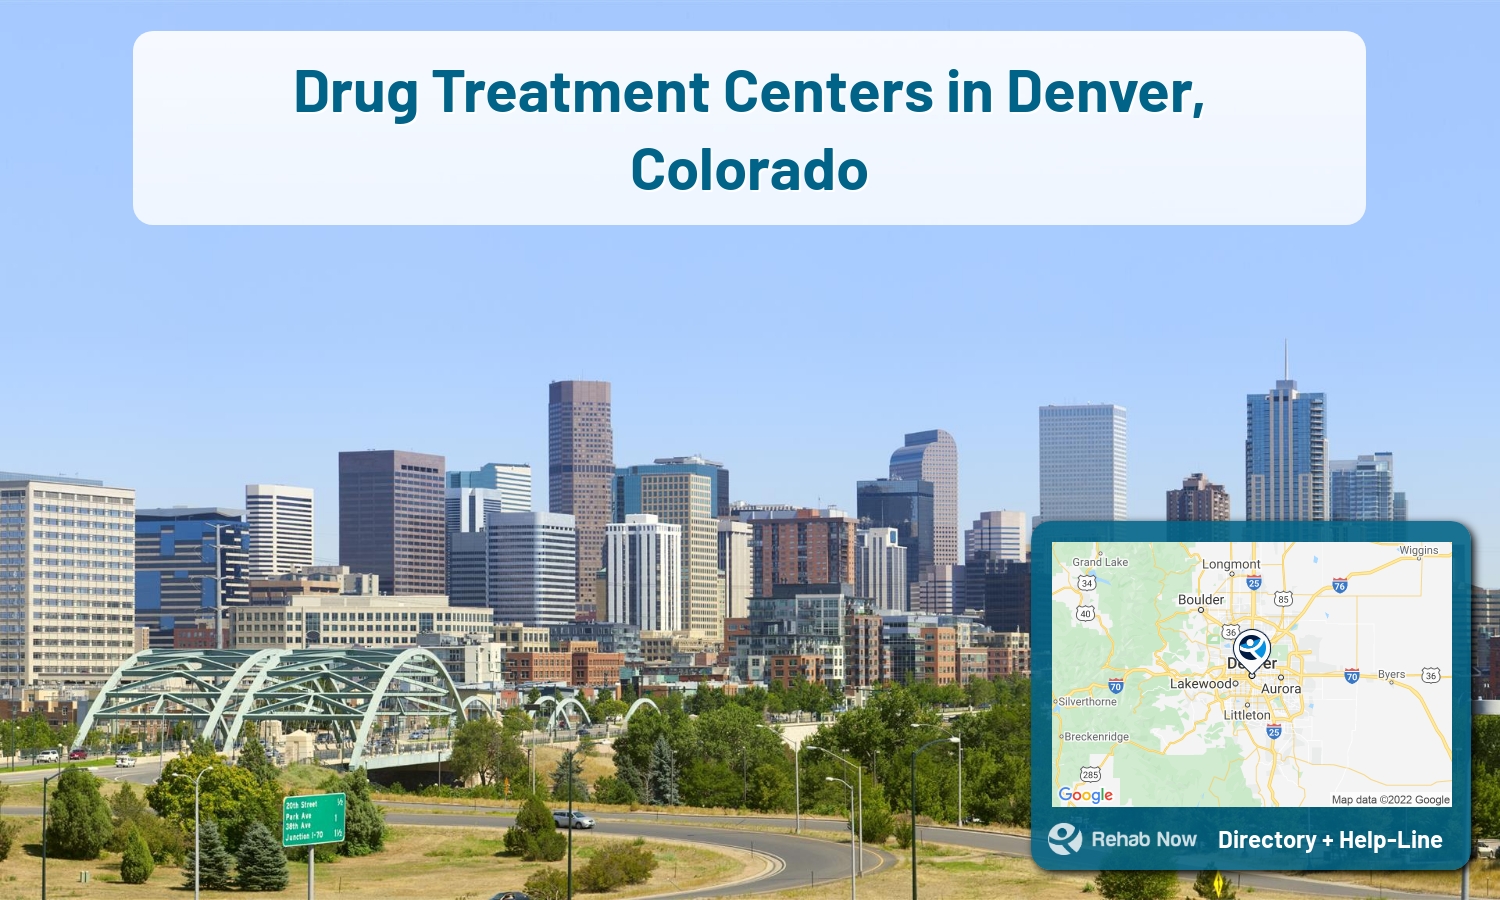 Need treatment nearby in Denver, Colorado? Choose a drug/alcohol rehab center from our list, or call our hotline now for free help.